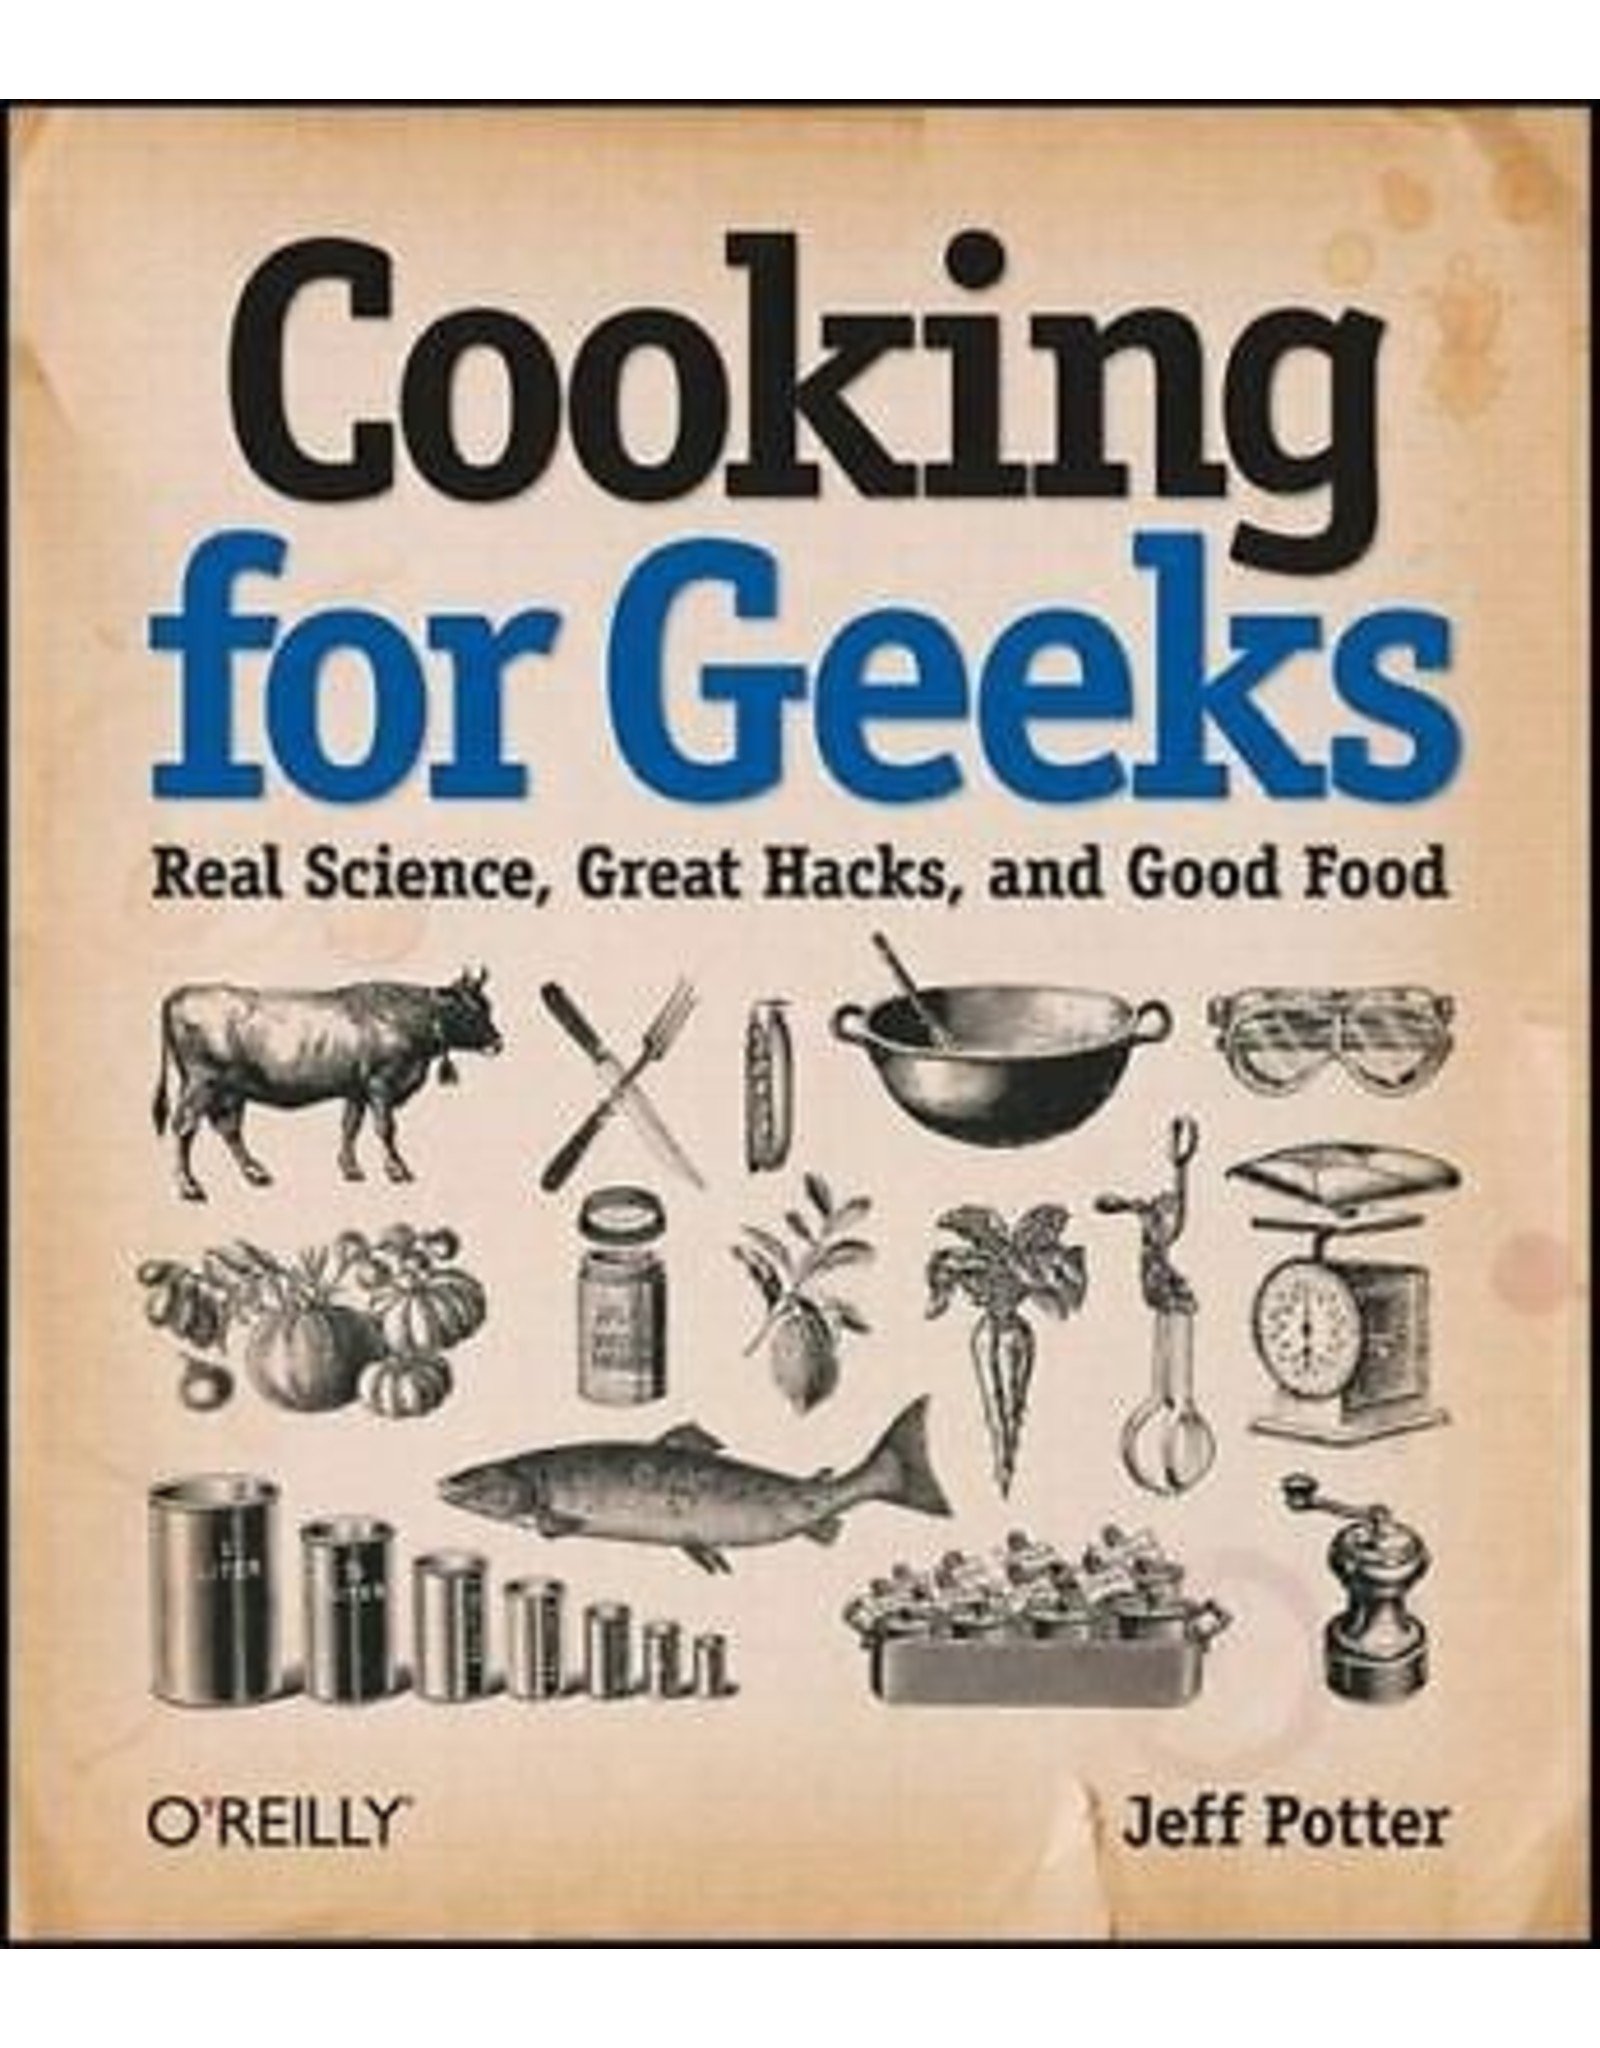 Literature Cooking for Geeks: Real Science, Great Hacks, and Good Food